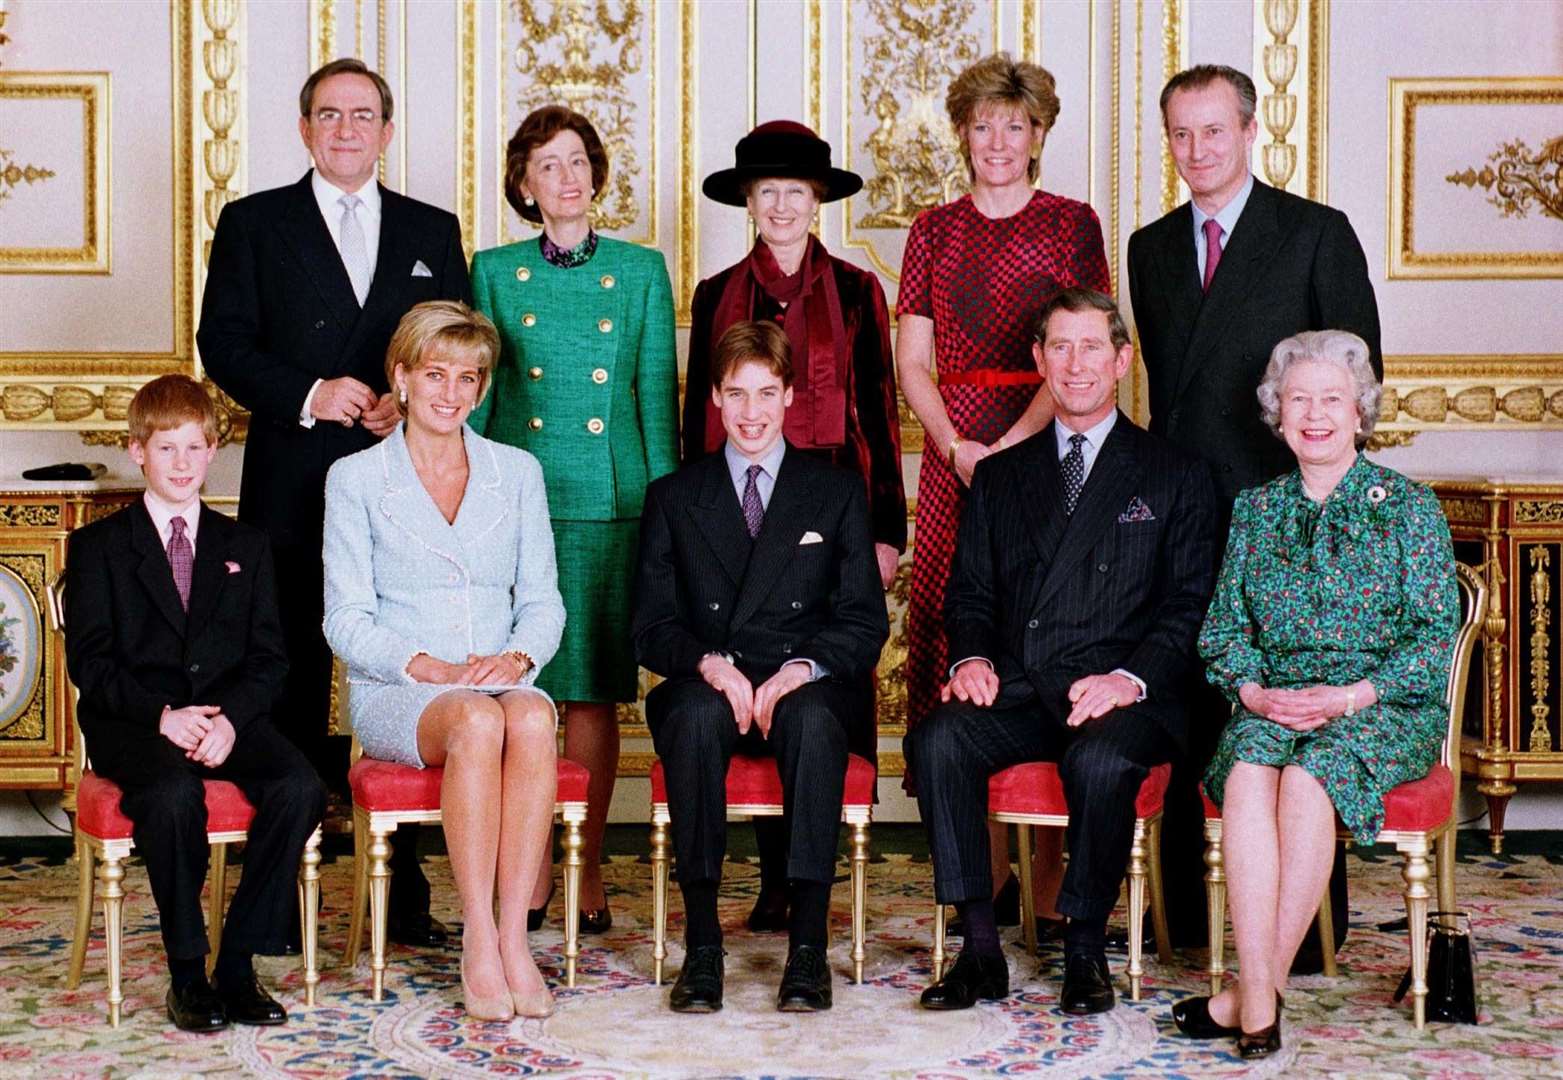 Constantine (back left) with the royal family on the day of Prince William’s confirmation in 1997 (John Stillwell/PA)